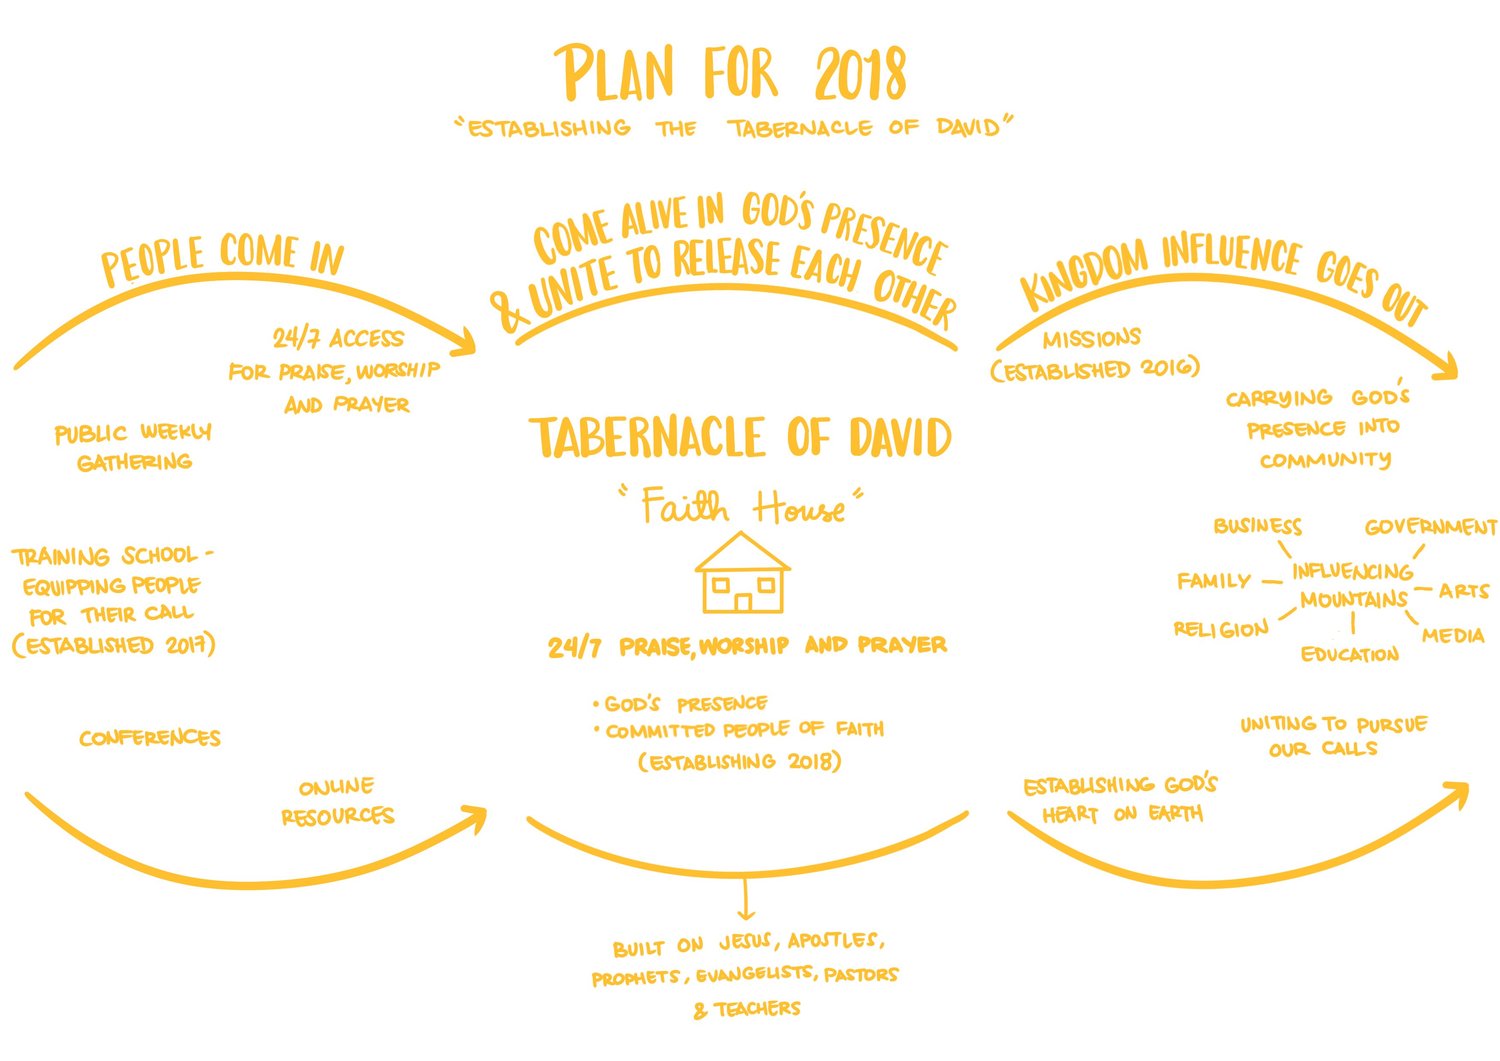 Actual "Plan for 2018" posted on website